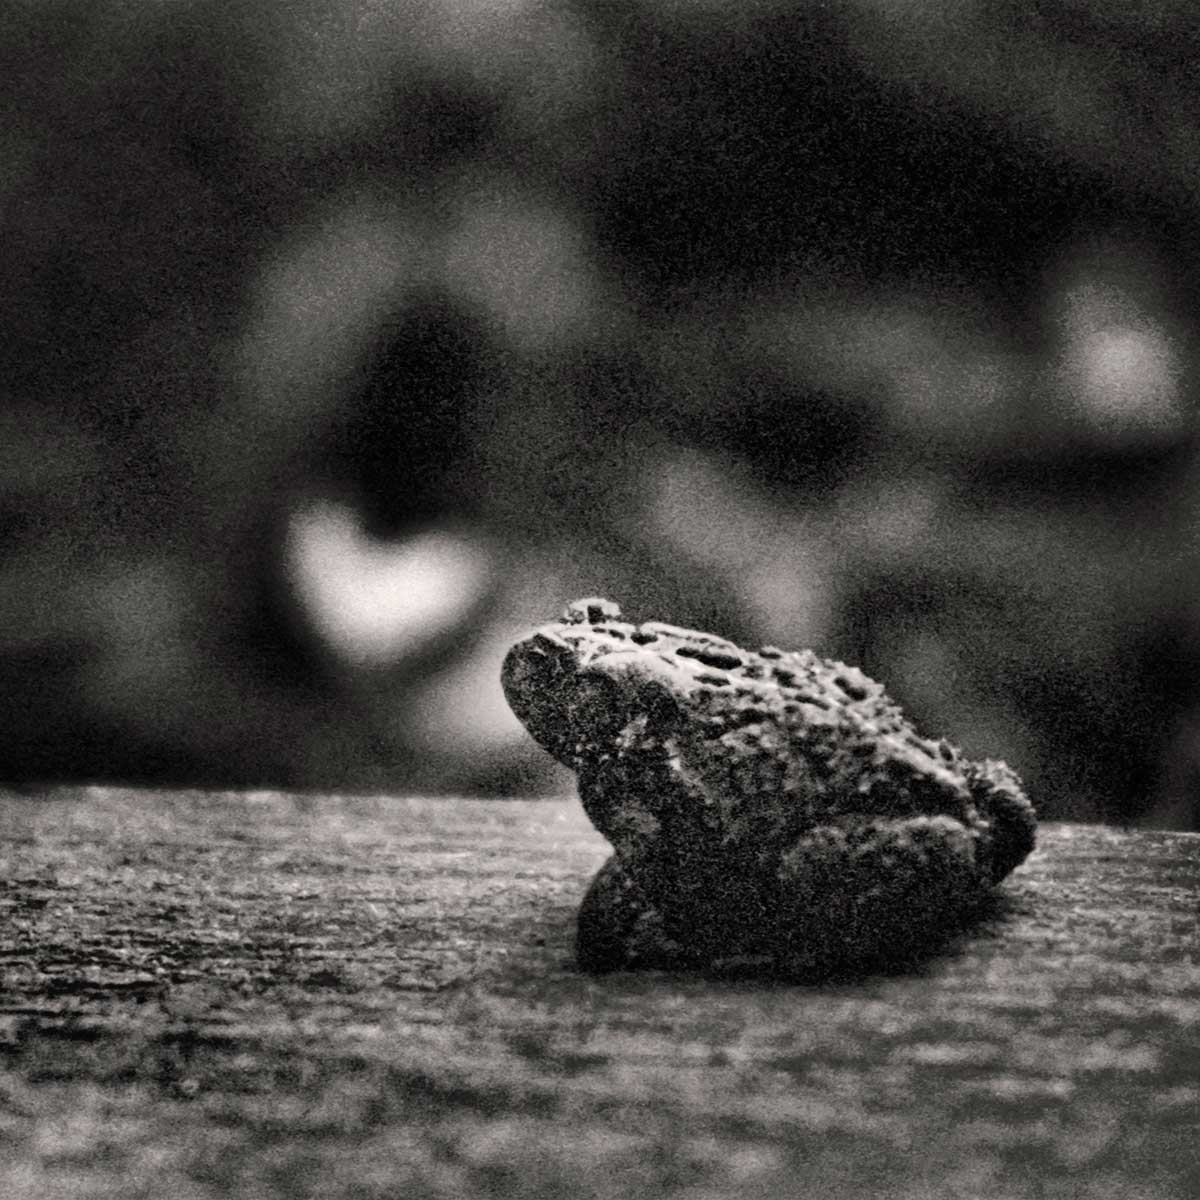 toad hopping by in search of a hiding place